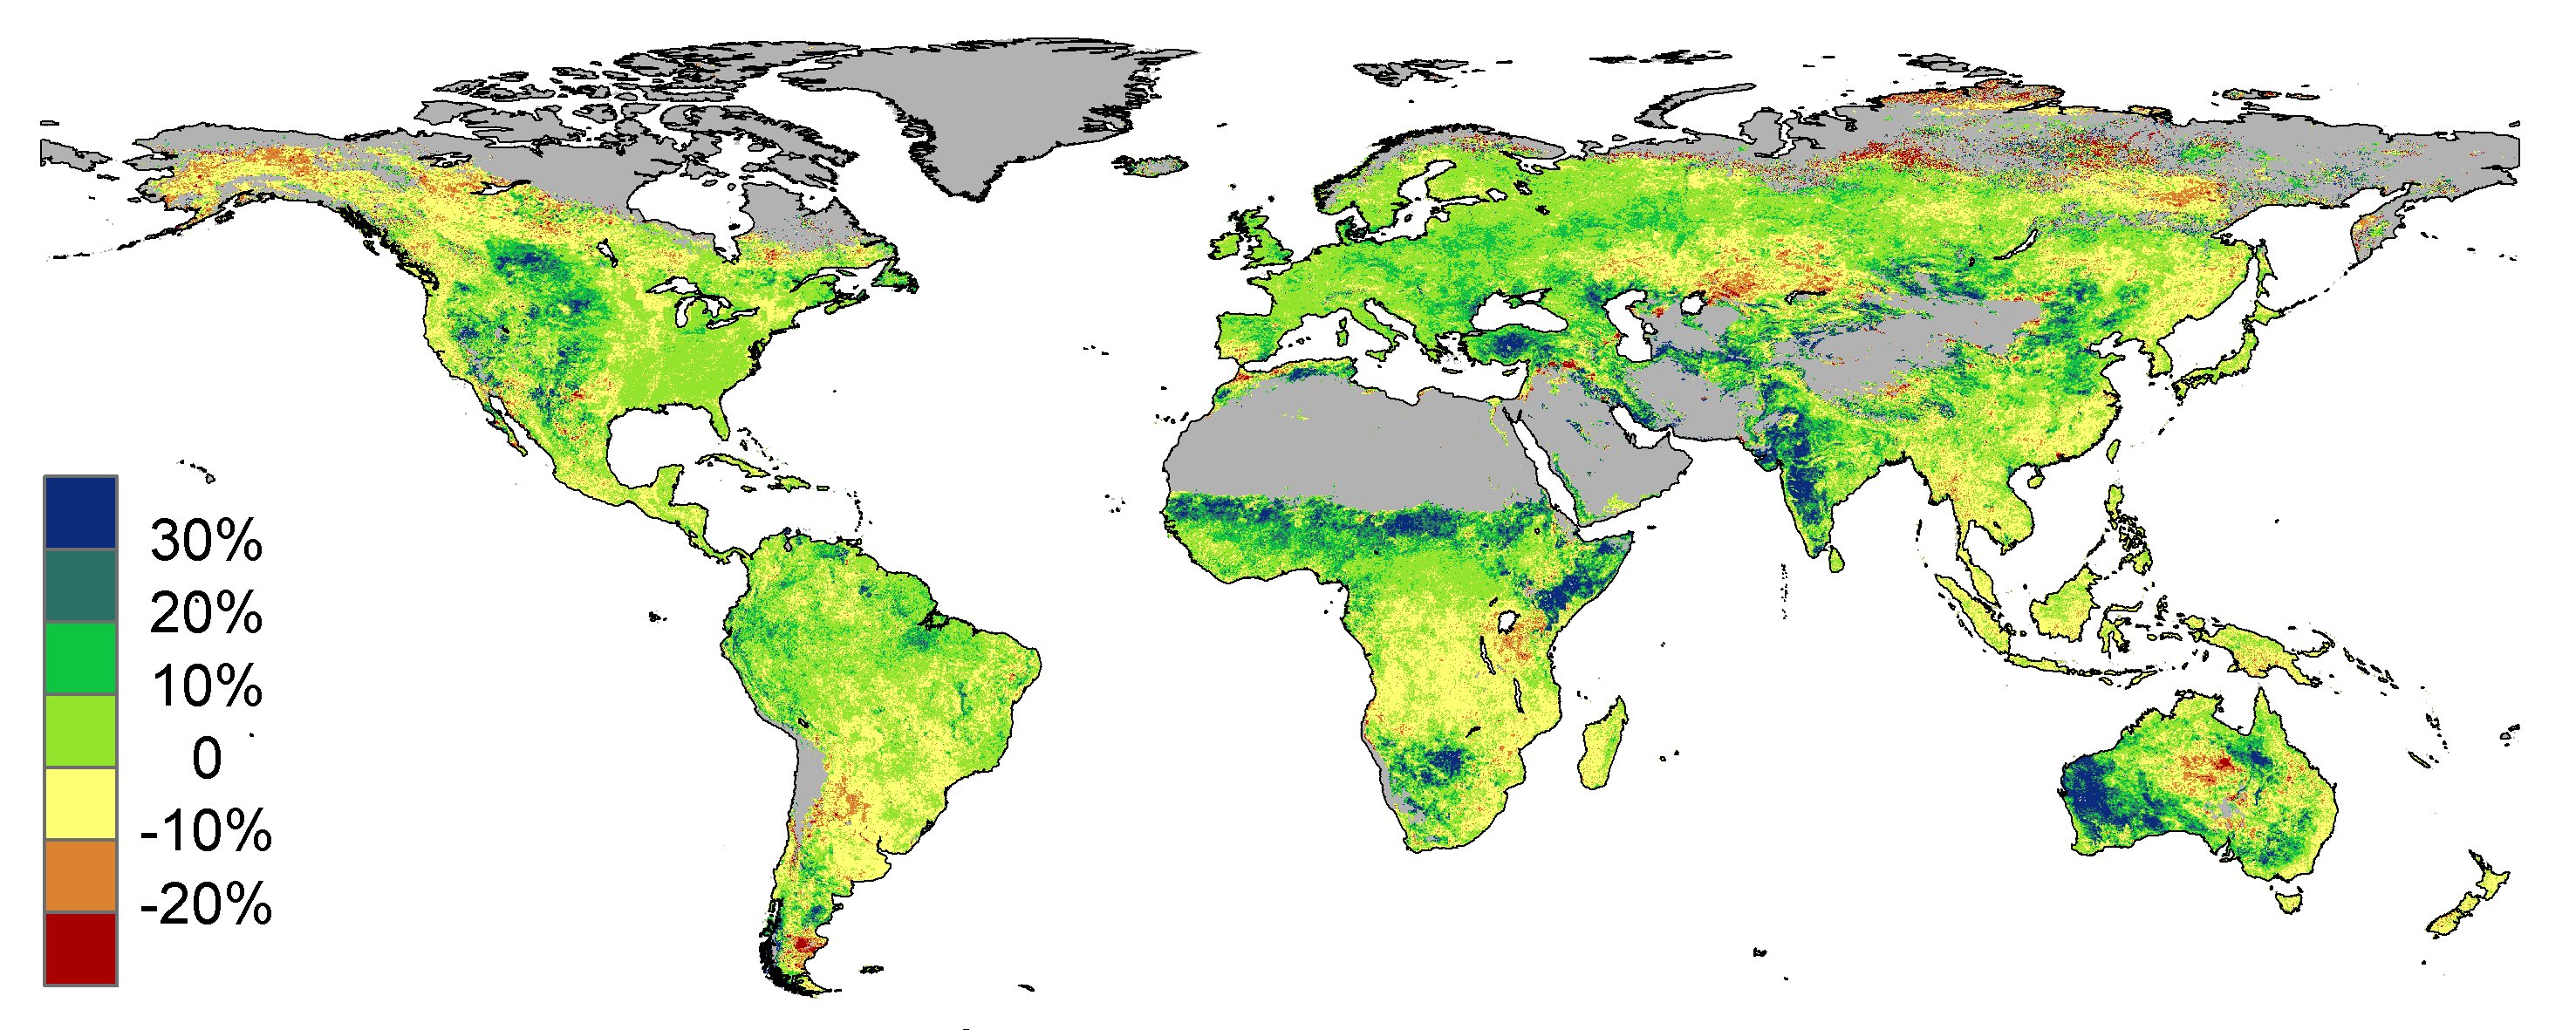 Estimated changes in vegetative cover due to CO2 fertilization between 1982 and 2010 (Donohue et al., 2013 GRL).